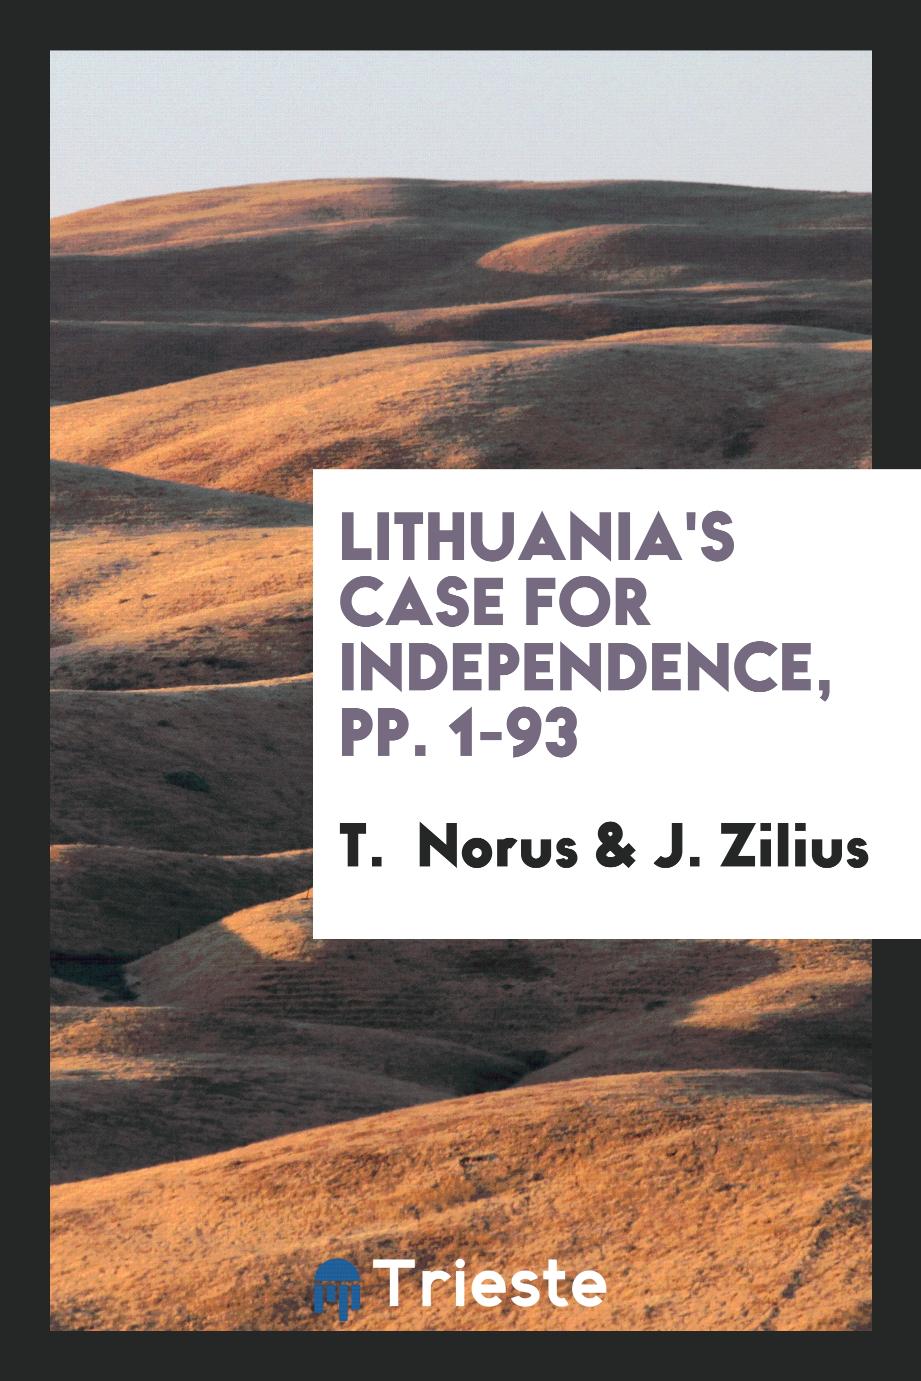 Lithuania's case for independence, pp. 1-93